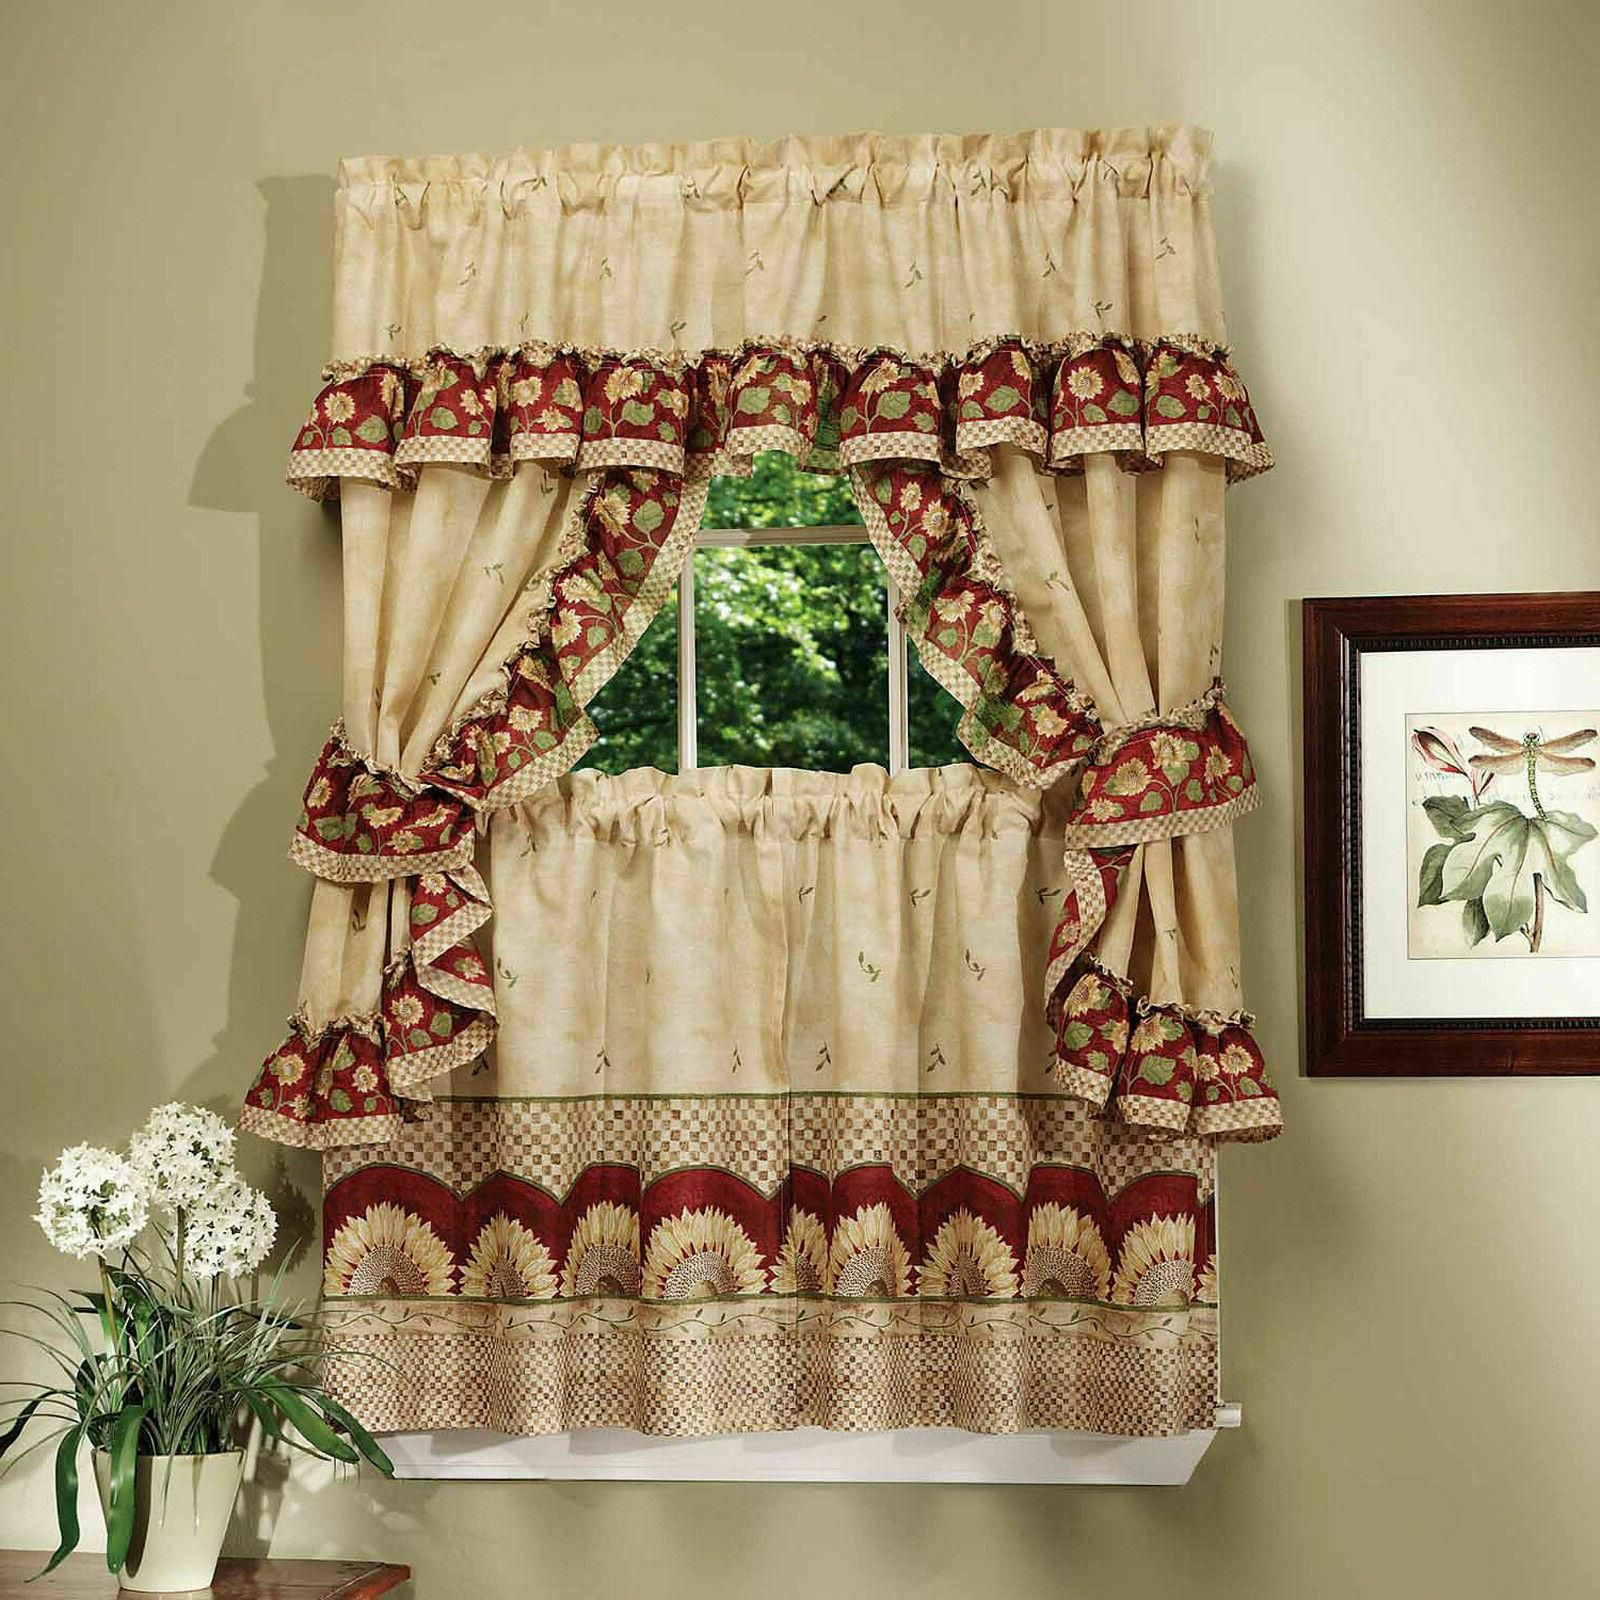 Sunflower Complete 5 Pc Cottage Kitchen Curtain Set Regarding Sunflower Cottage Kitchen Curtain Tier And Valance Sets 